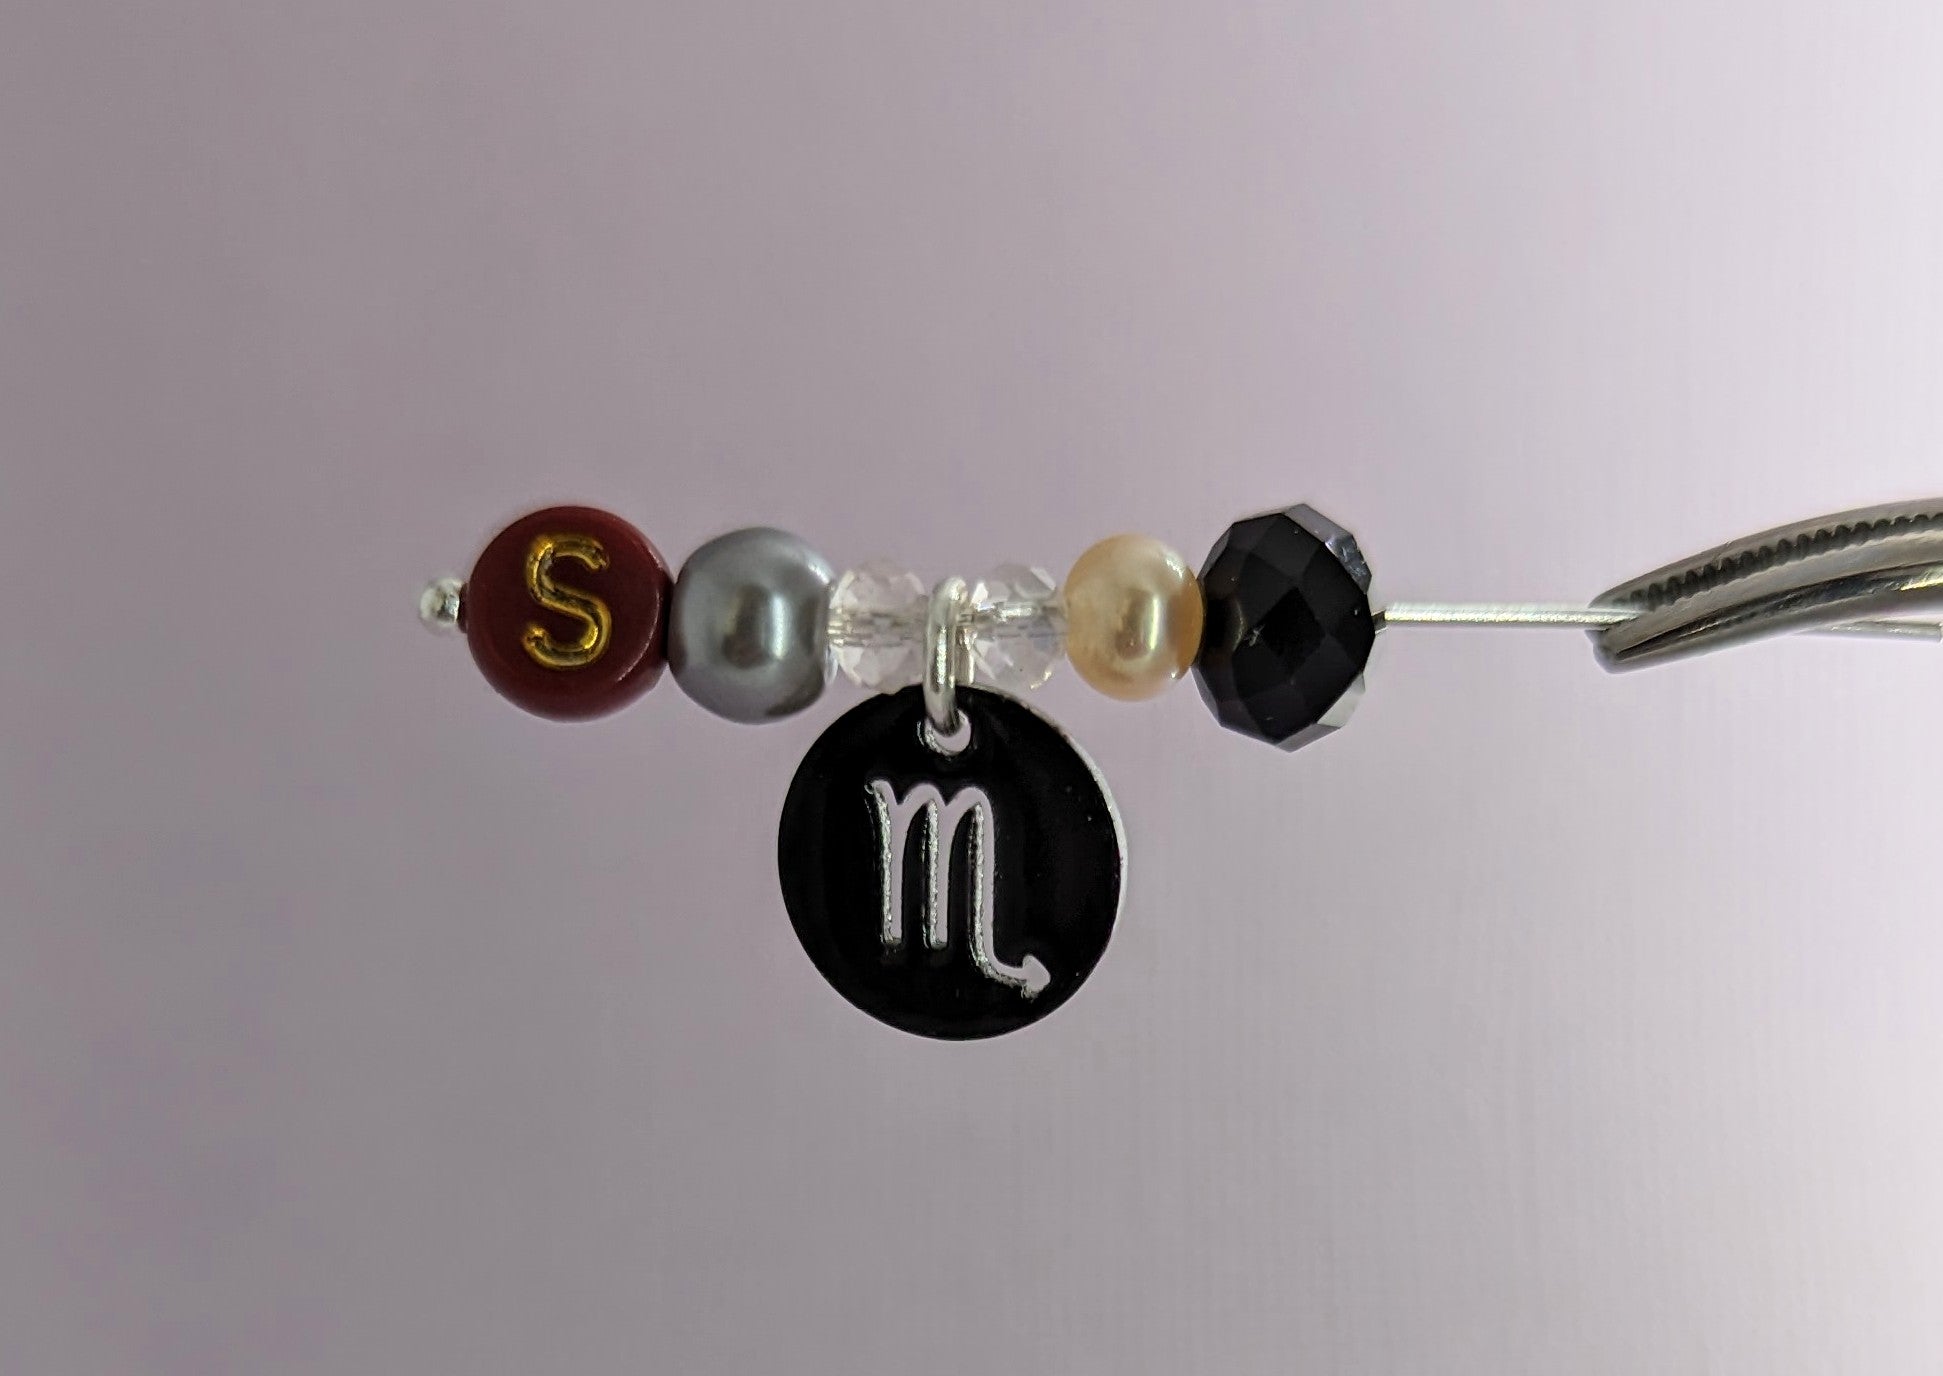 Scorpio star sign personalised necklace with freshwater pearl and crystal beads. 